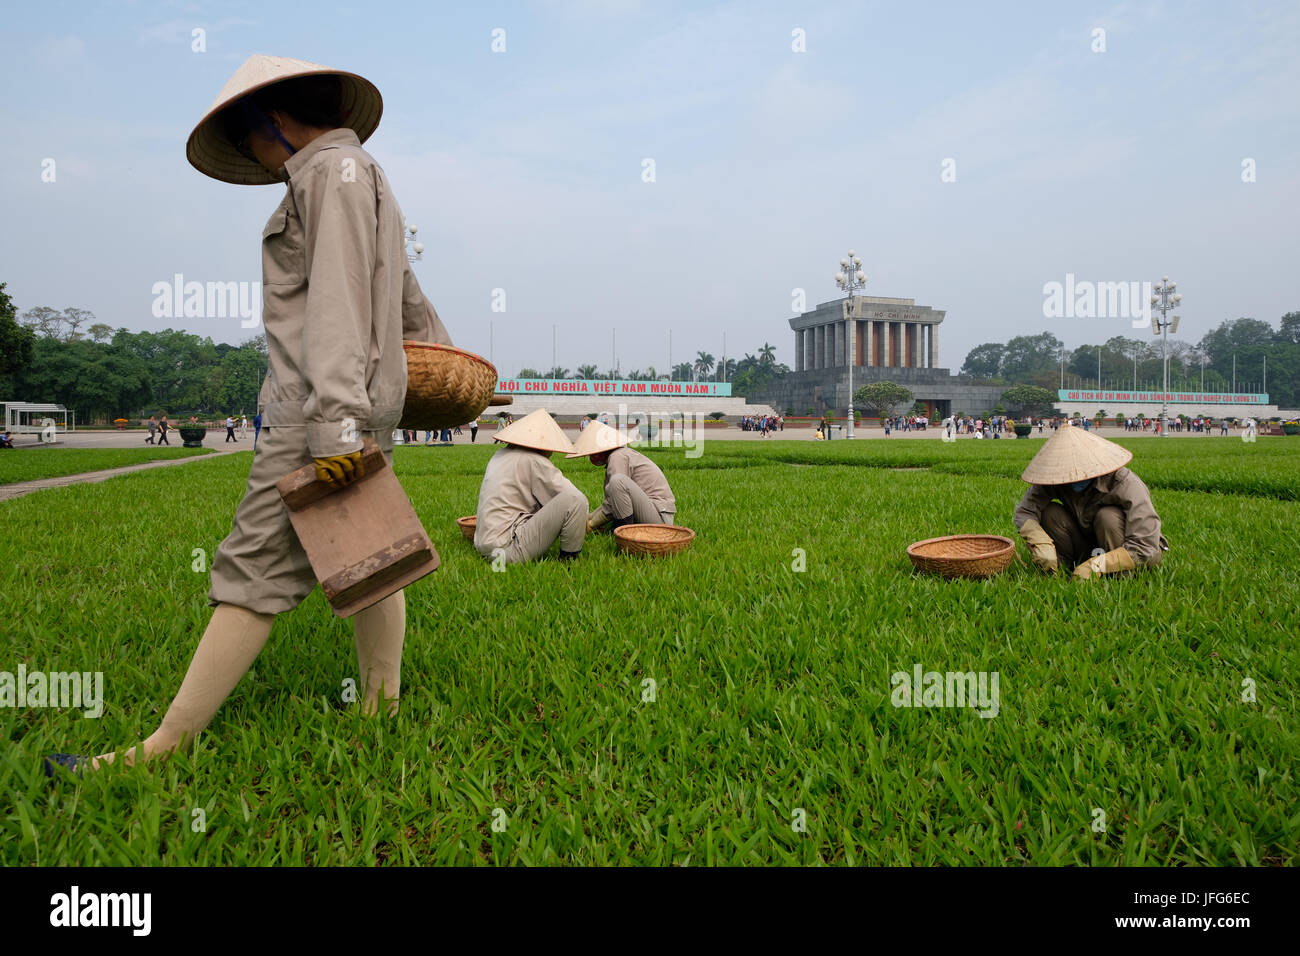 Gardeners taking care of the lawn in the Ba Dinh Square, in front of the Ho Chi Minh mausoleum in Hanoi, Vietnam, Asia Stock Photo